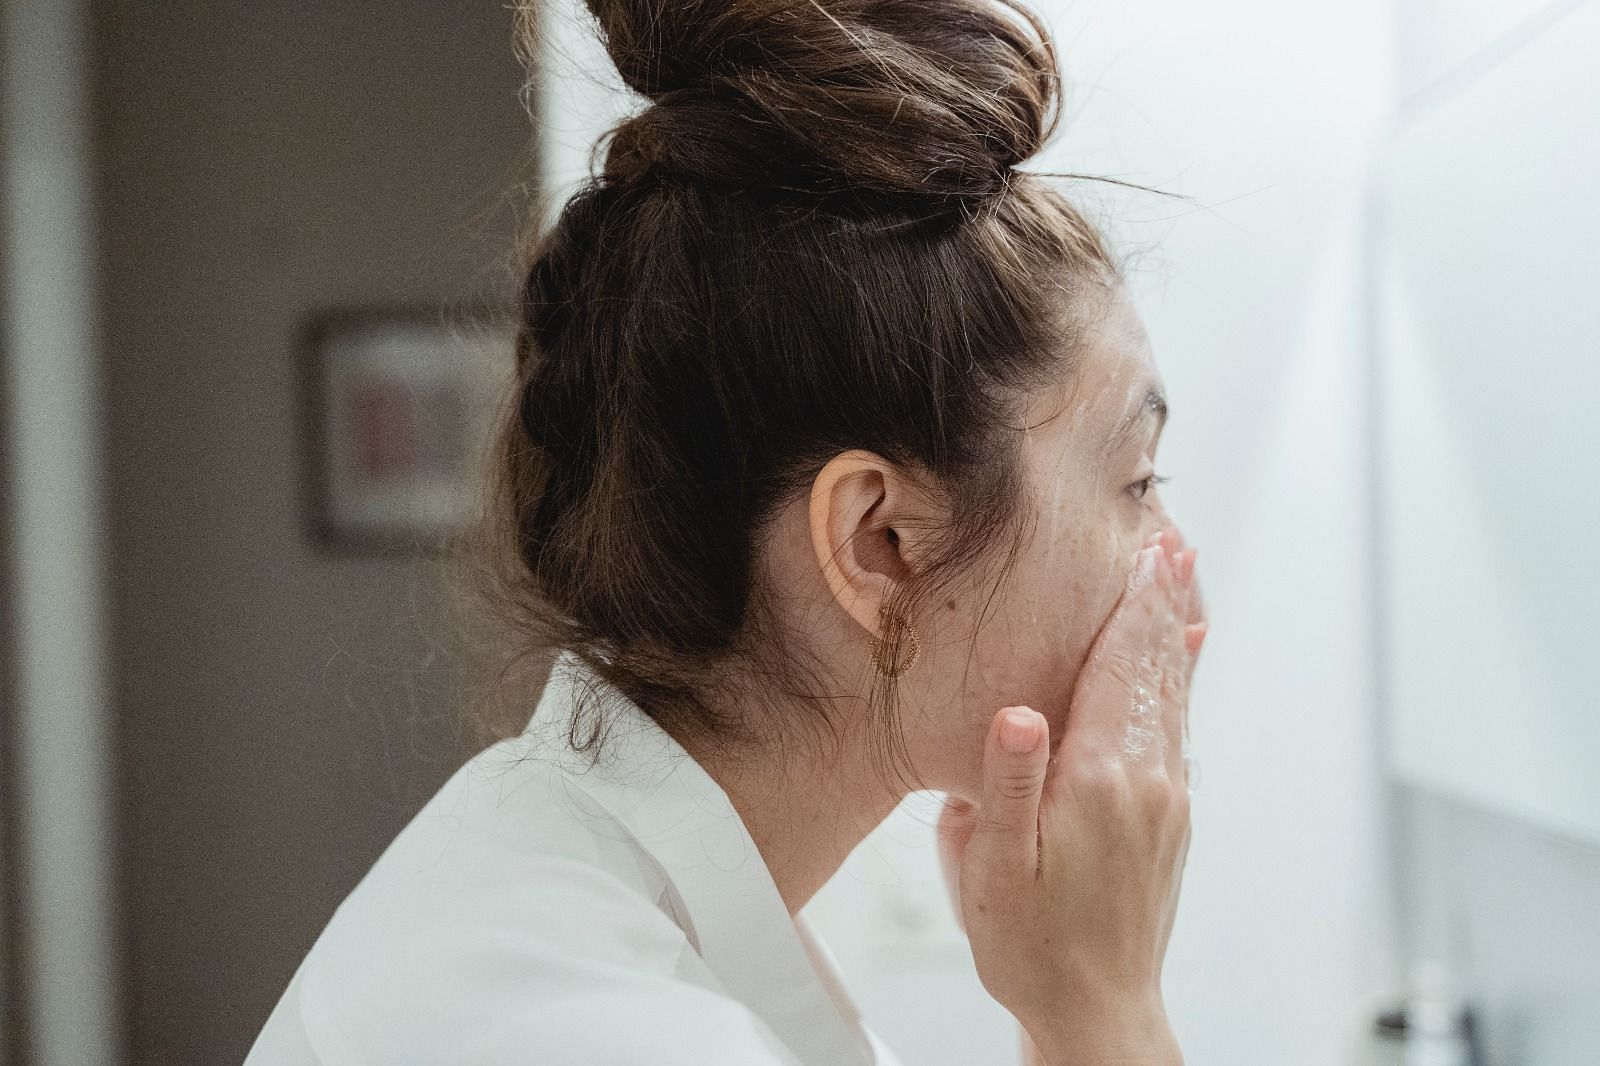 Washing face with cold water (Image via Pexels/Miriam Alonso)